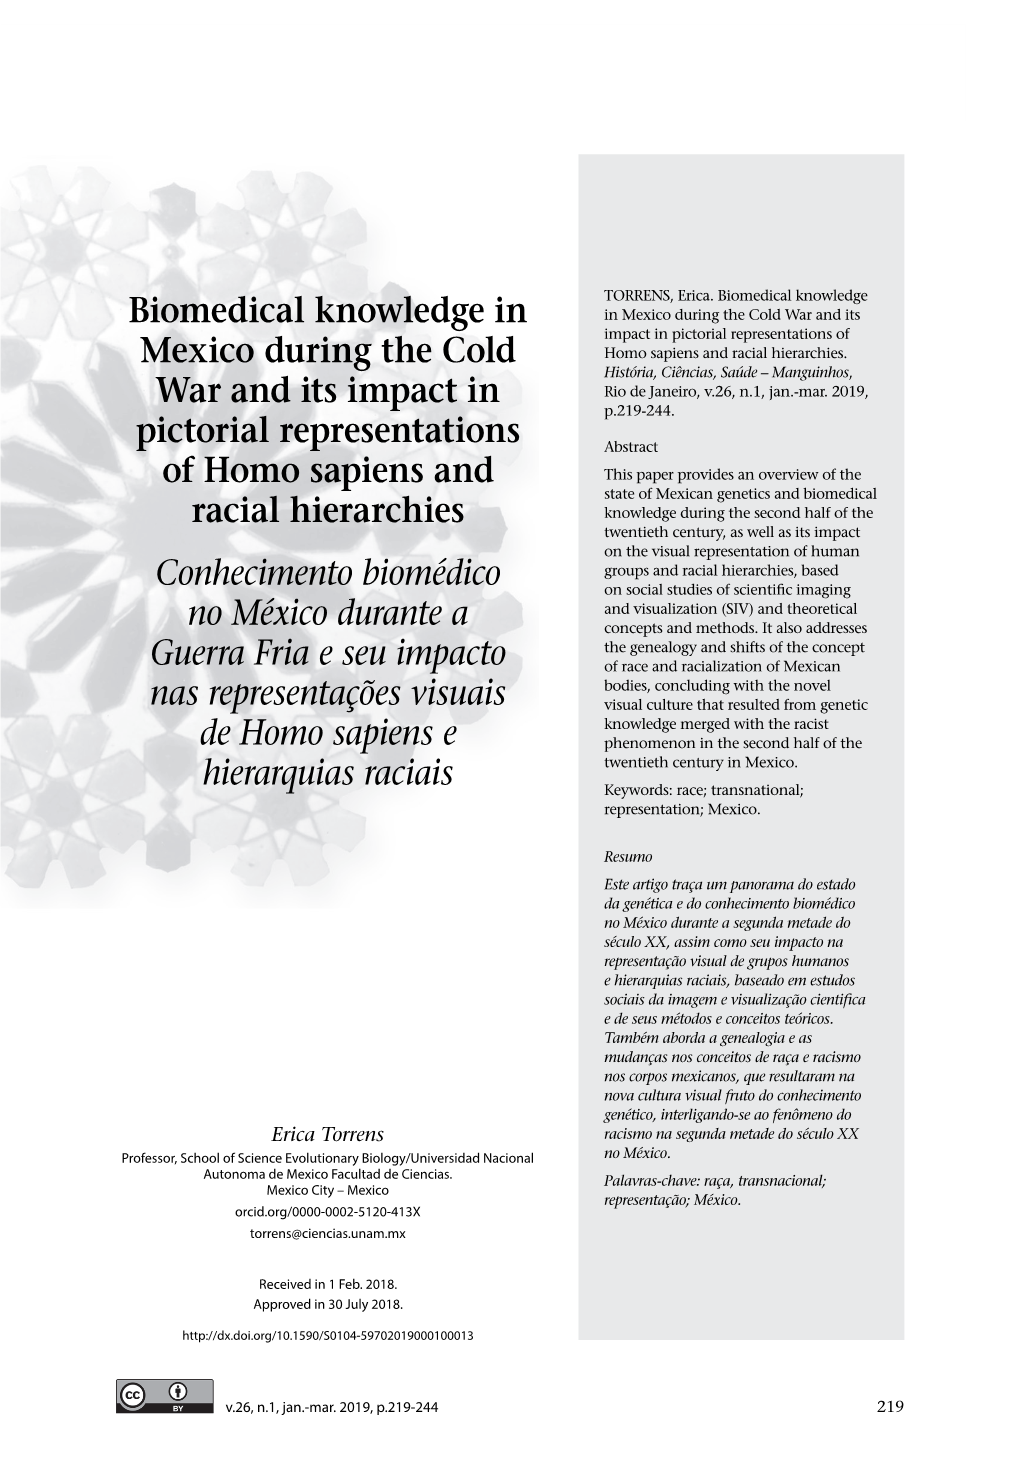 Biomedical Knowledge in Mexico During the Cold War and Its Impact